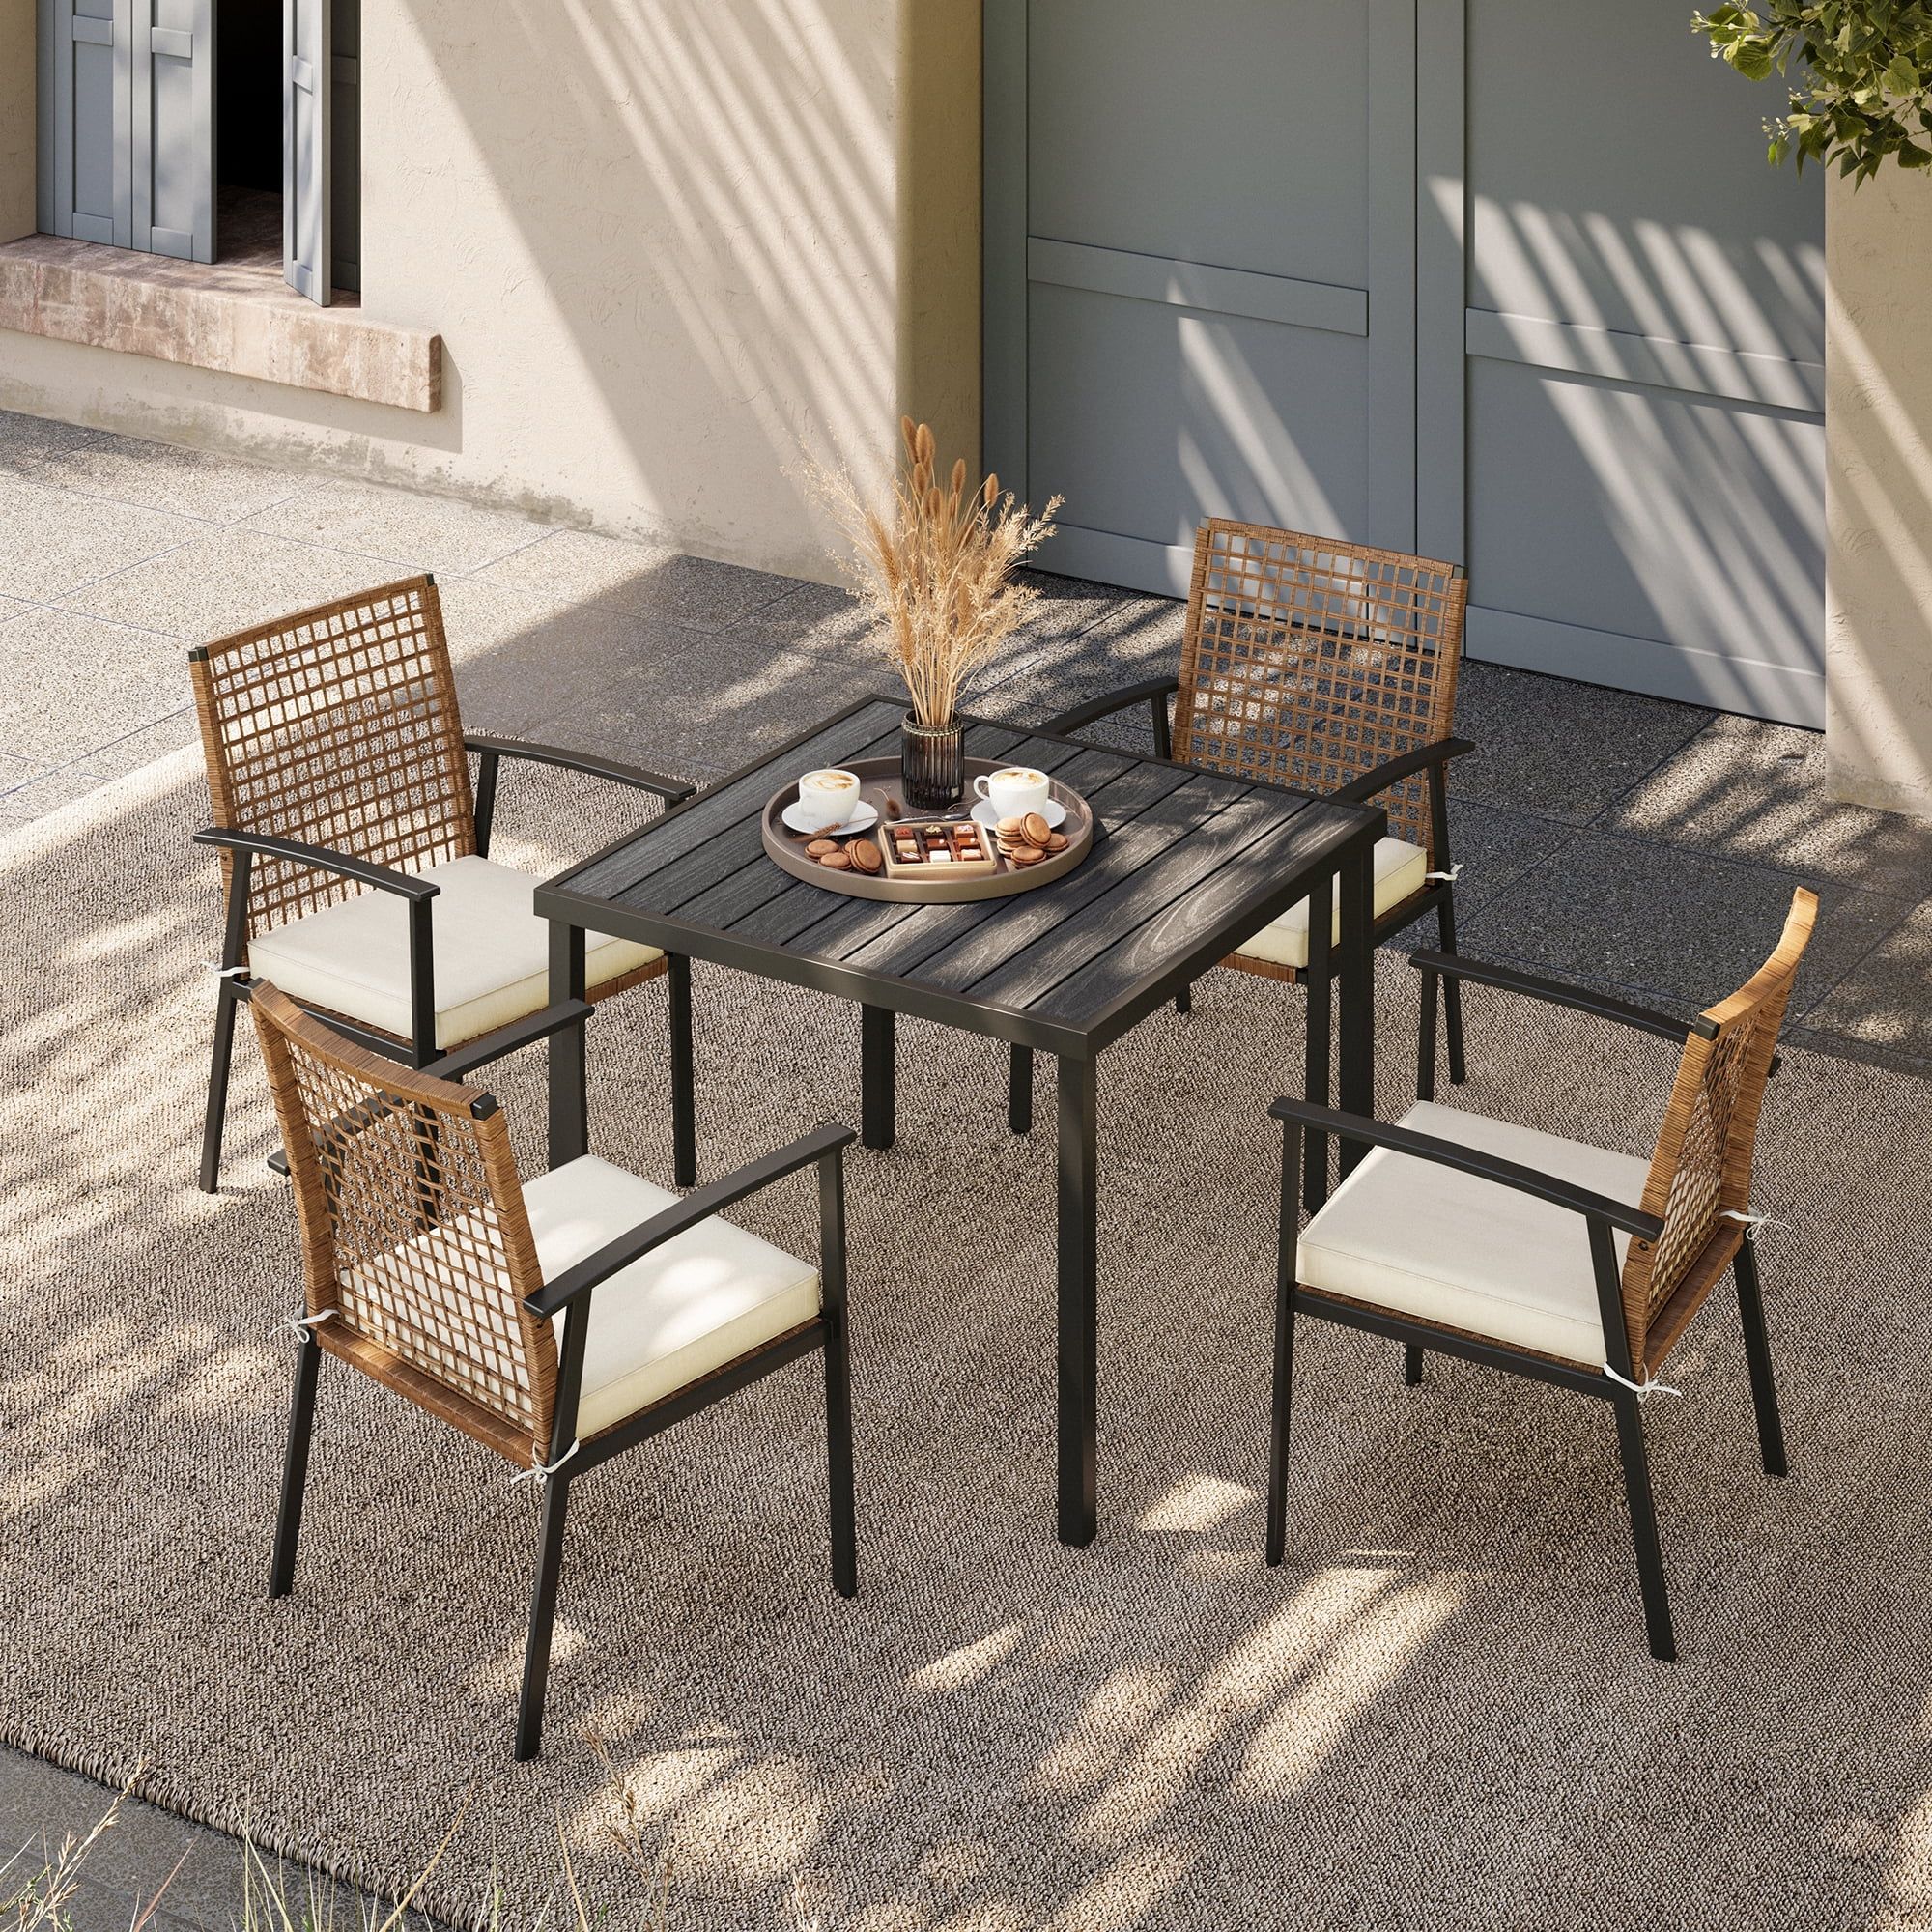 LAUSAINT HOME 5 Pieces Patio Dining Set, 4 PE Wicker Chairs with Beige Seat Cushions  and 1 Squar... | Walmart (US)